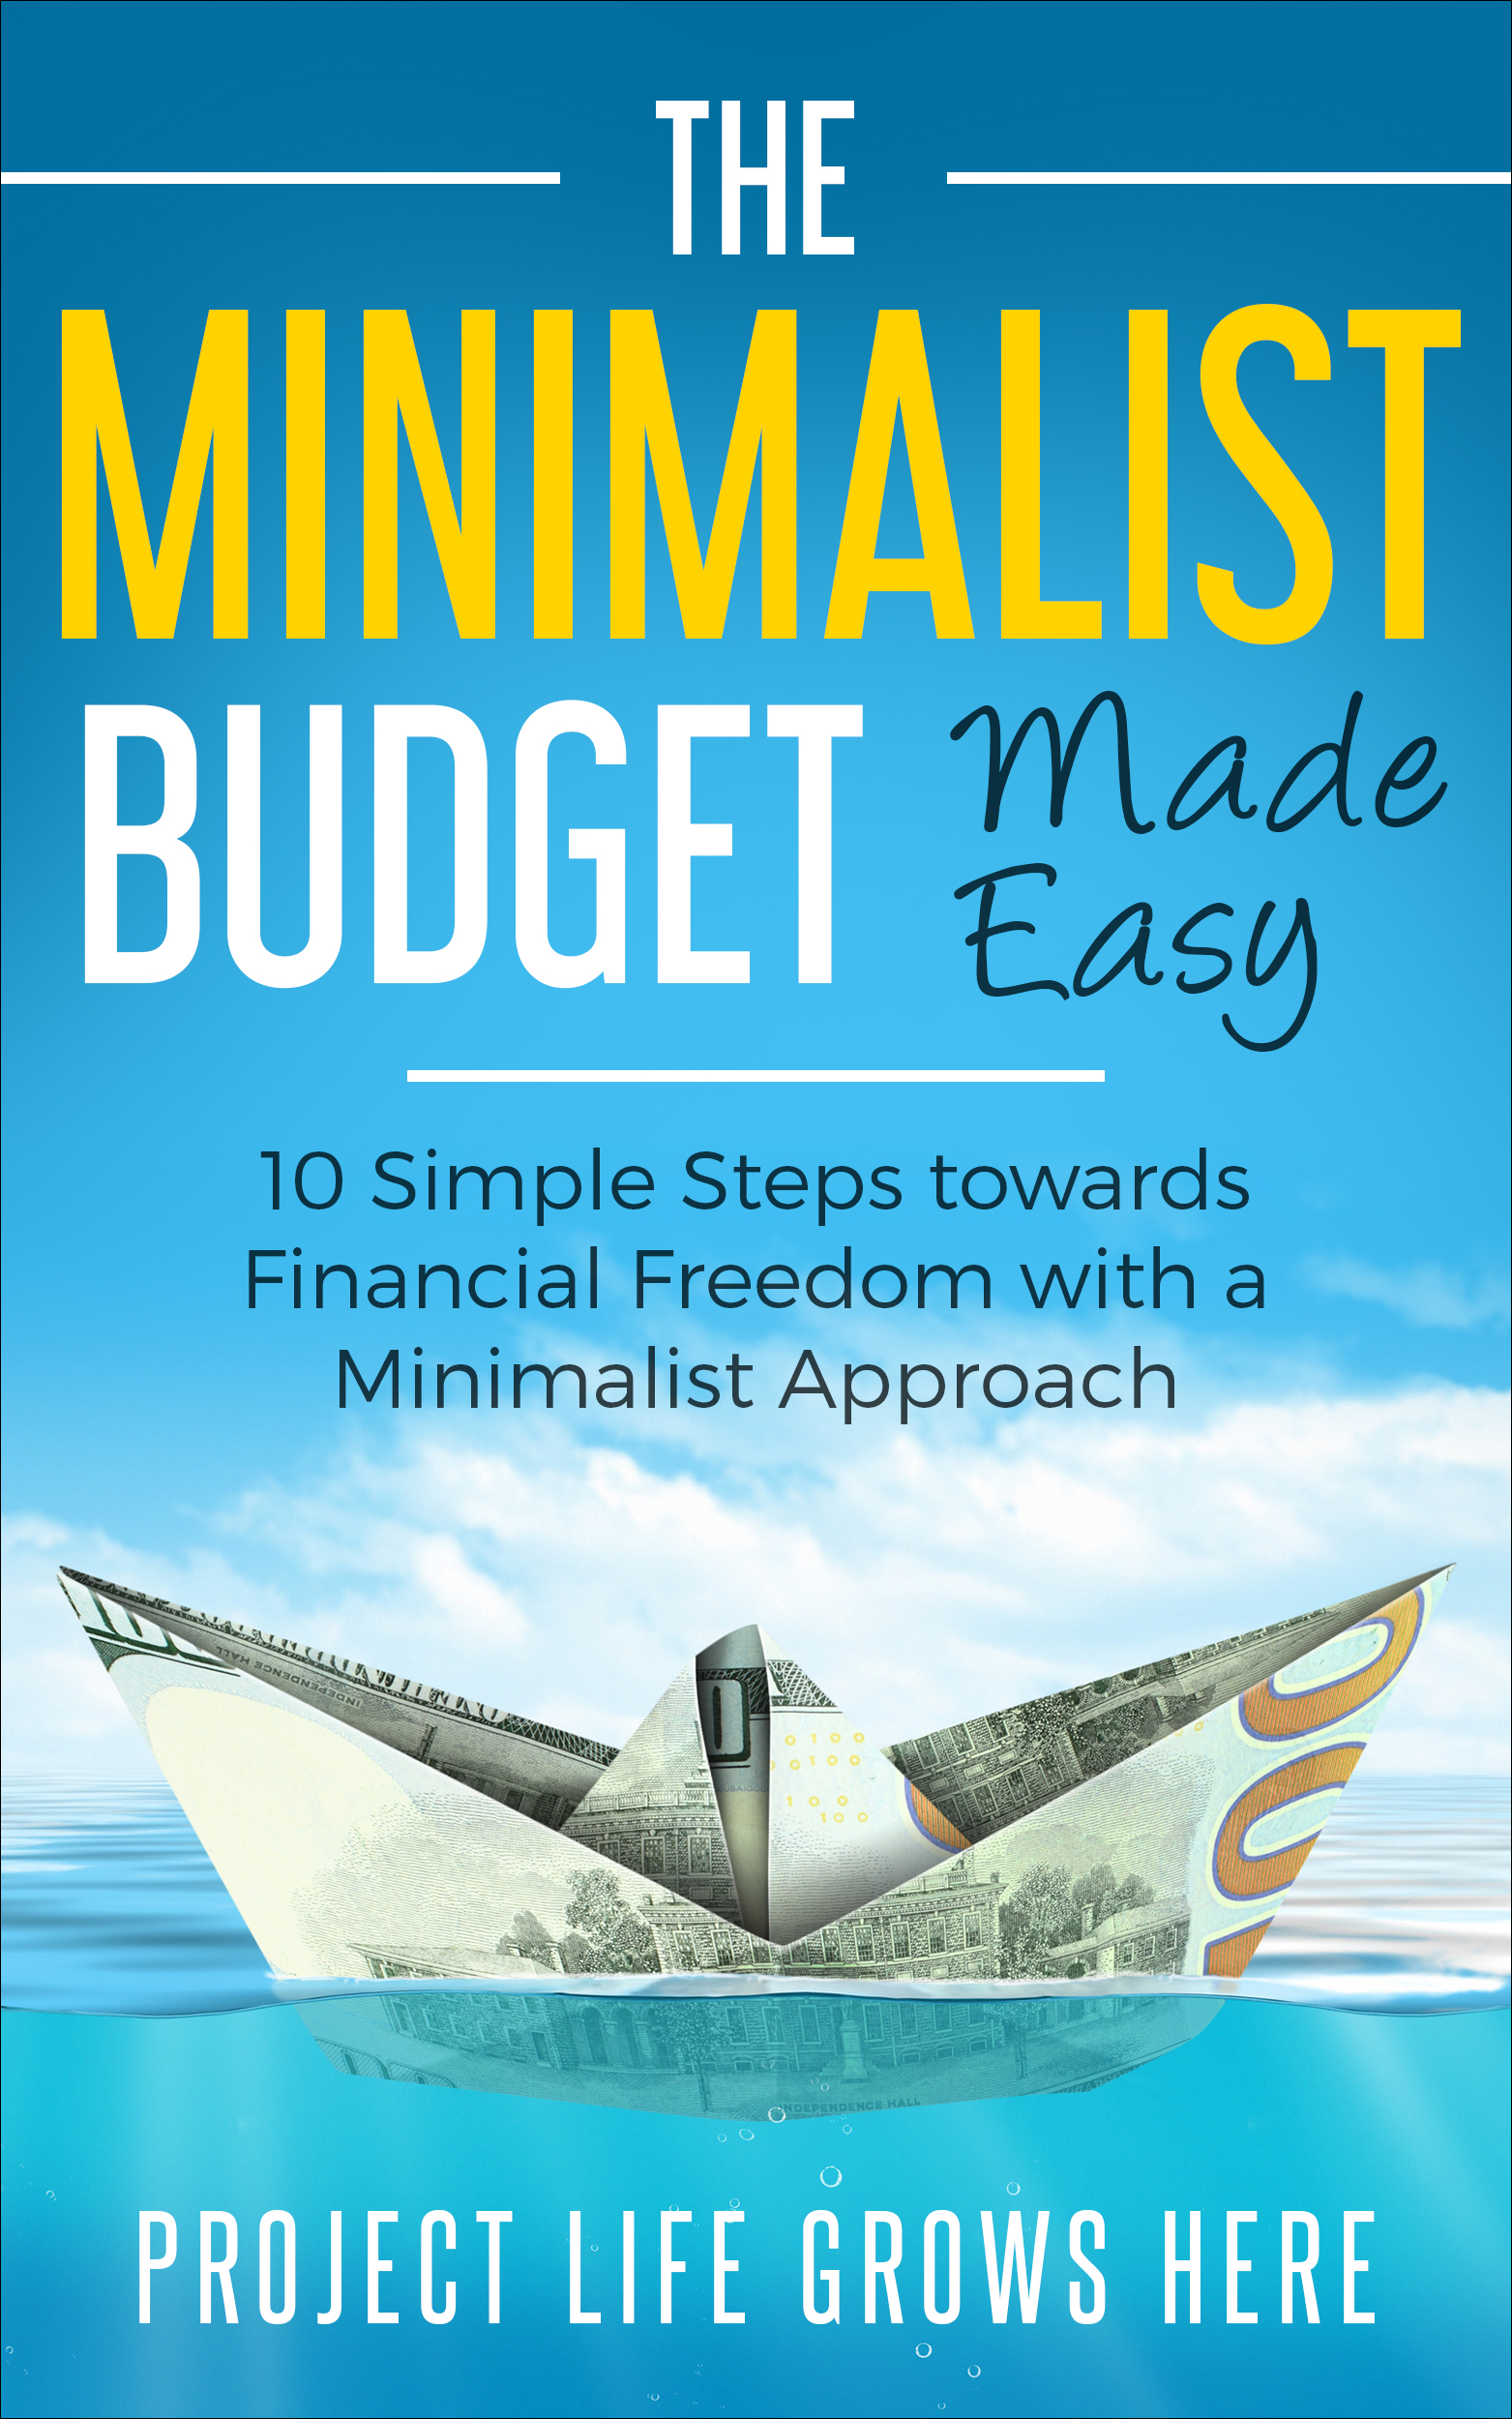 FREE: The Minimalist Budget: 10 Simple Steps towards Financial Freedom with a Minimalist Approach by Project Life Grows Here